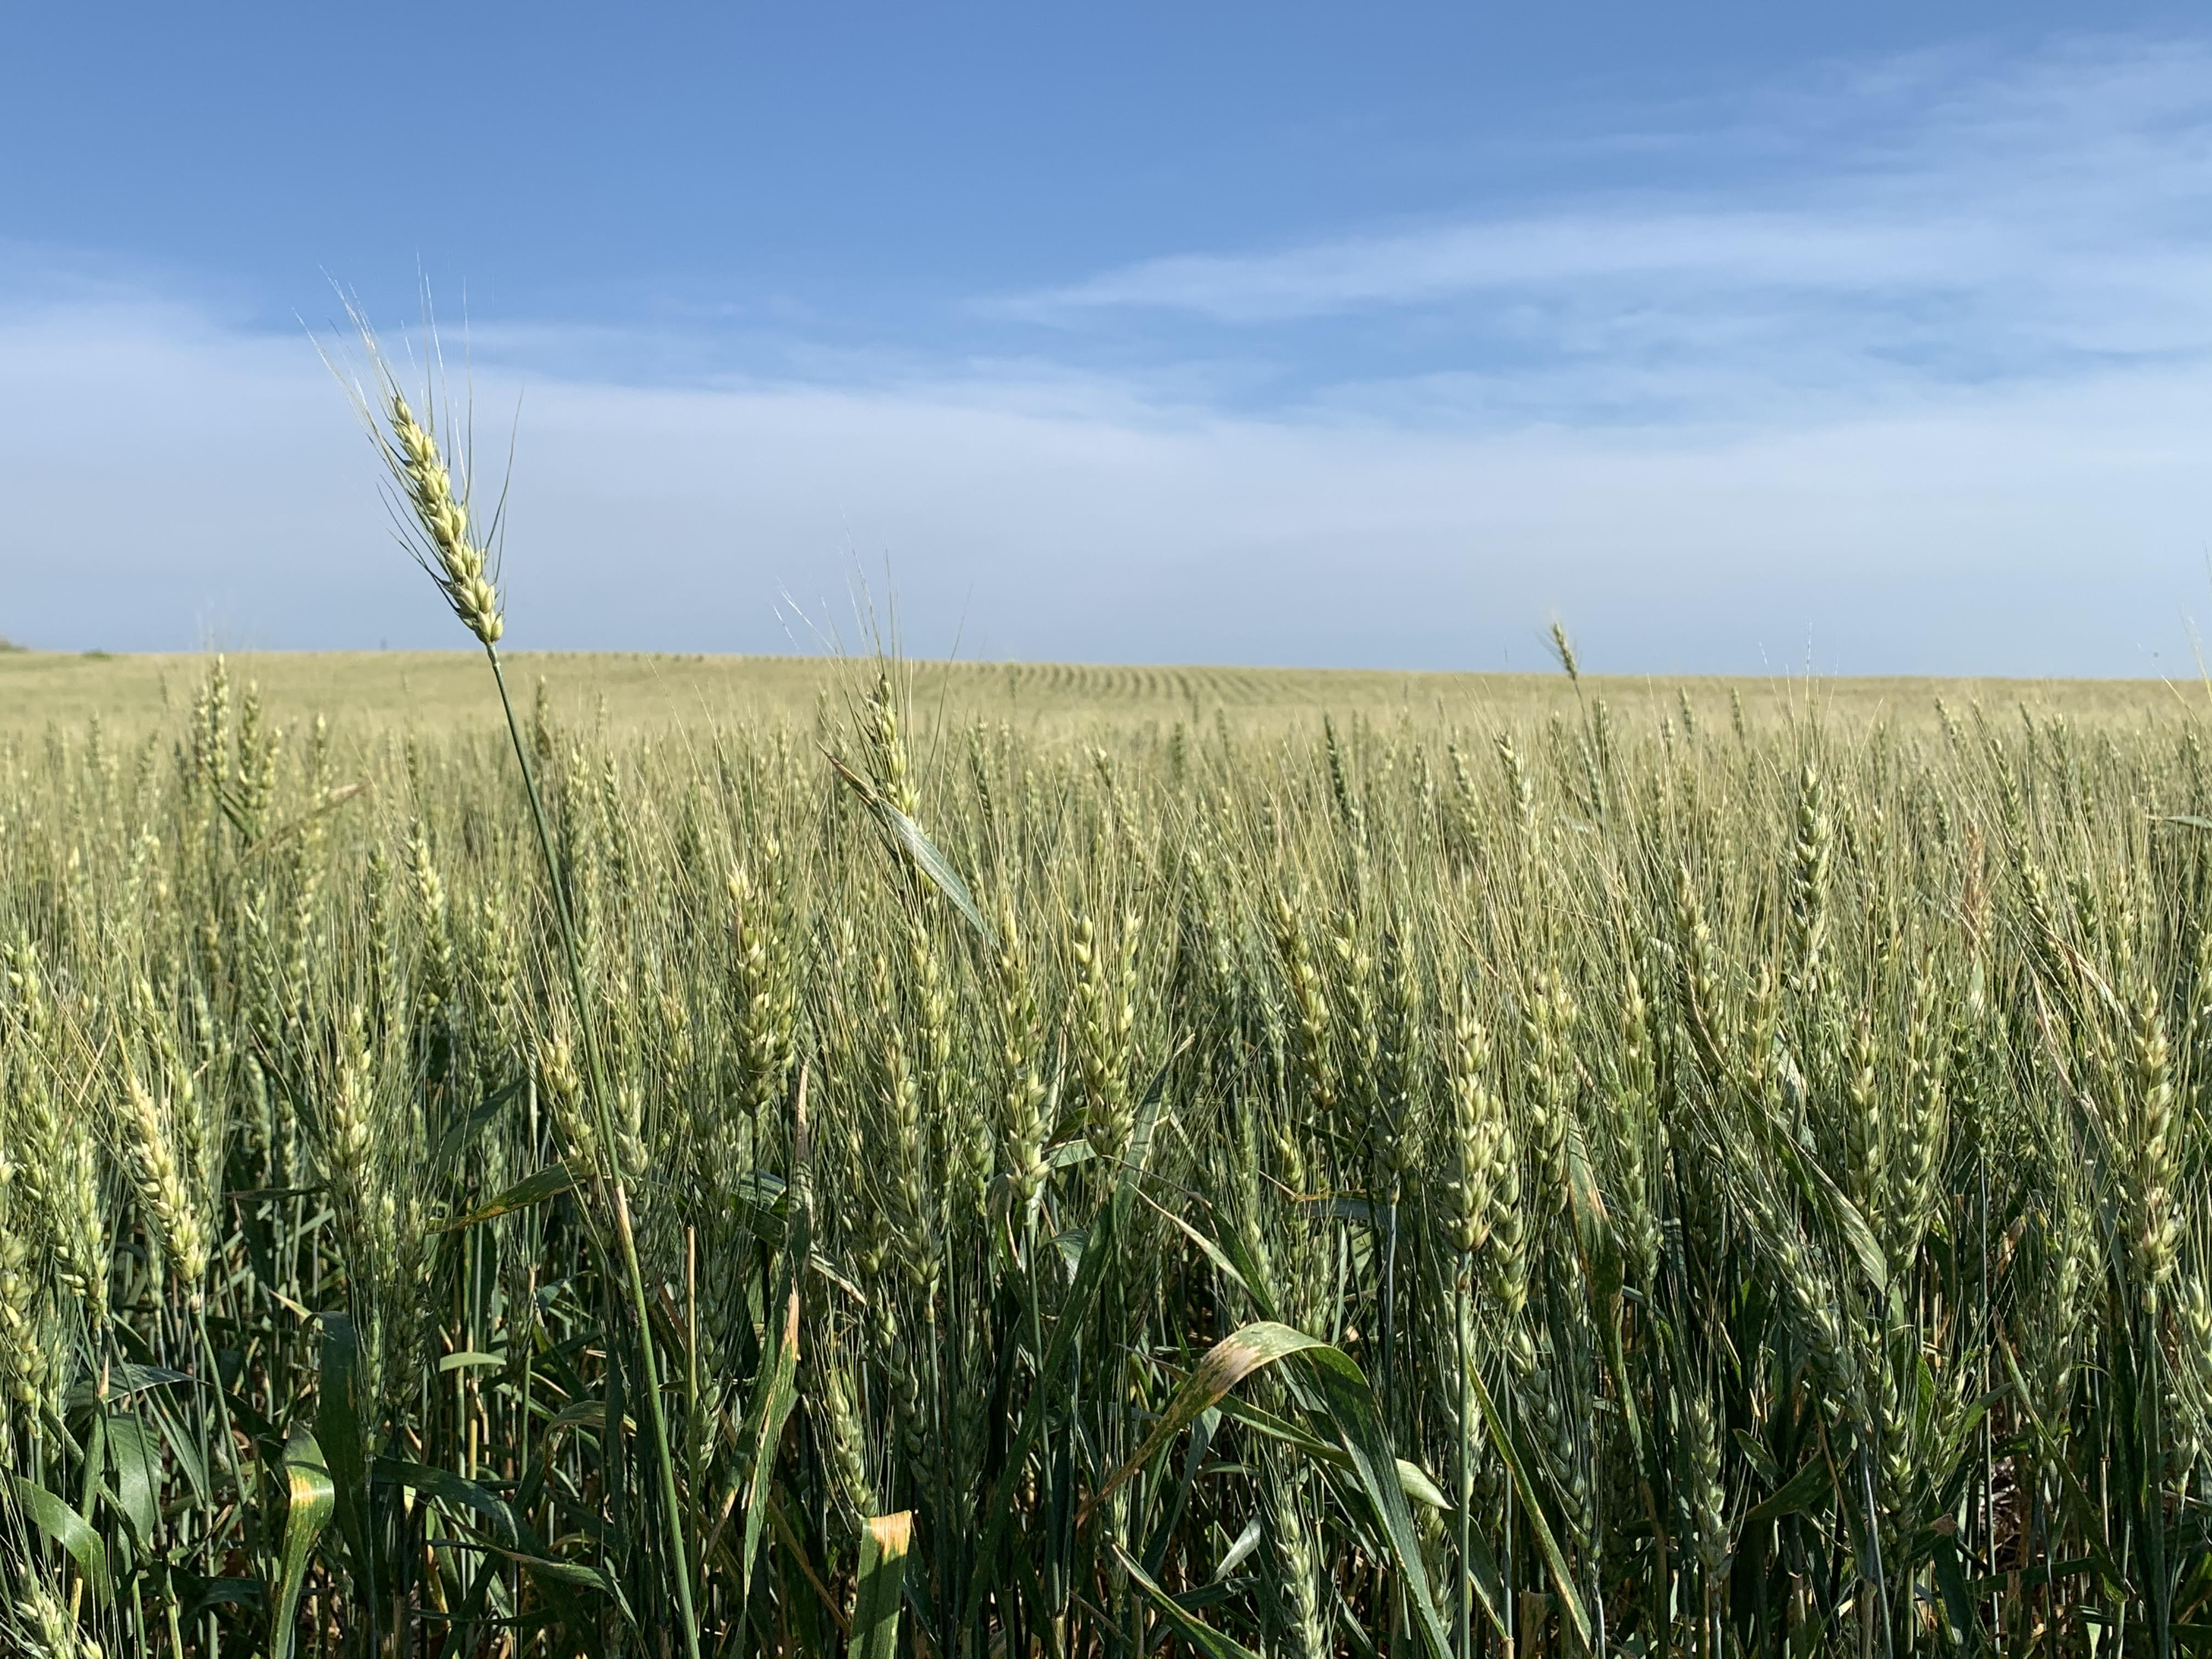 Morning Ag News, July 21, 2021: Drought conditions likely to impact seed supply for 2022